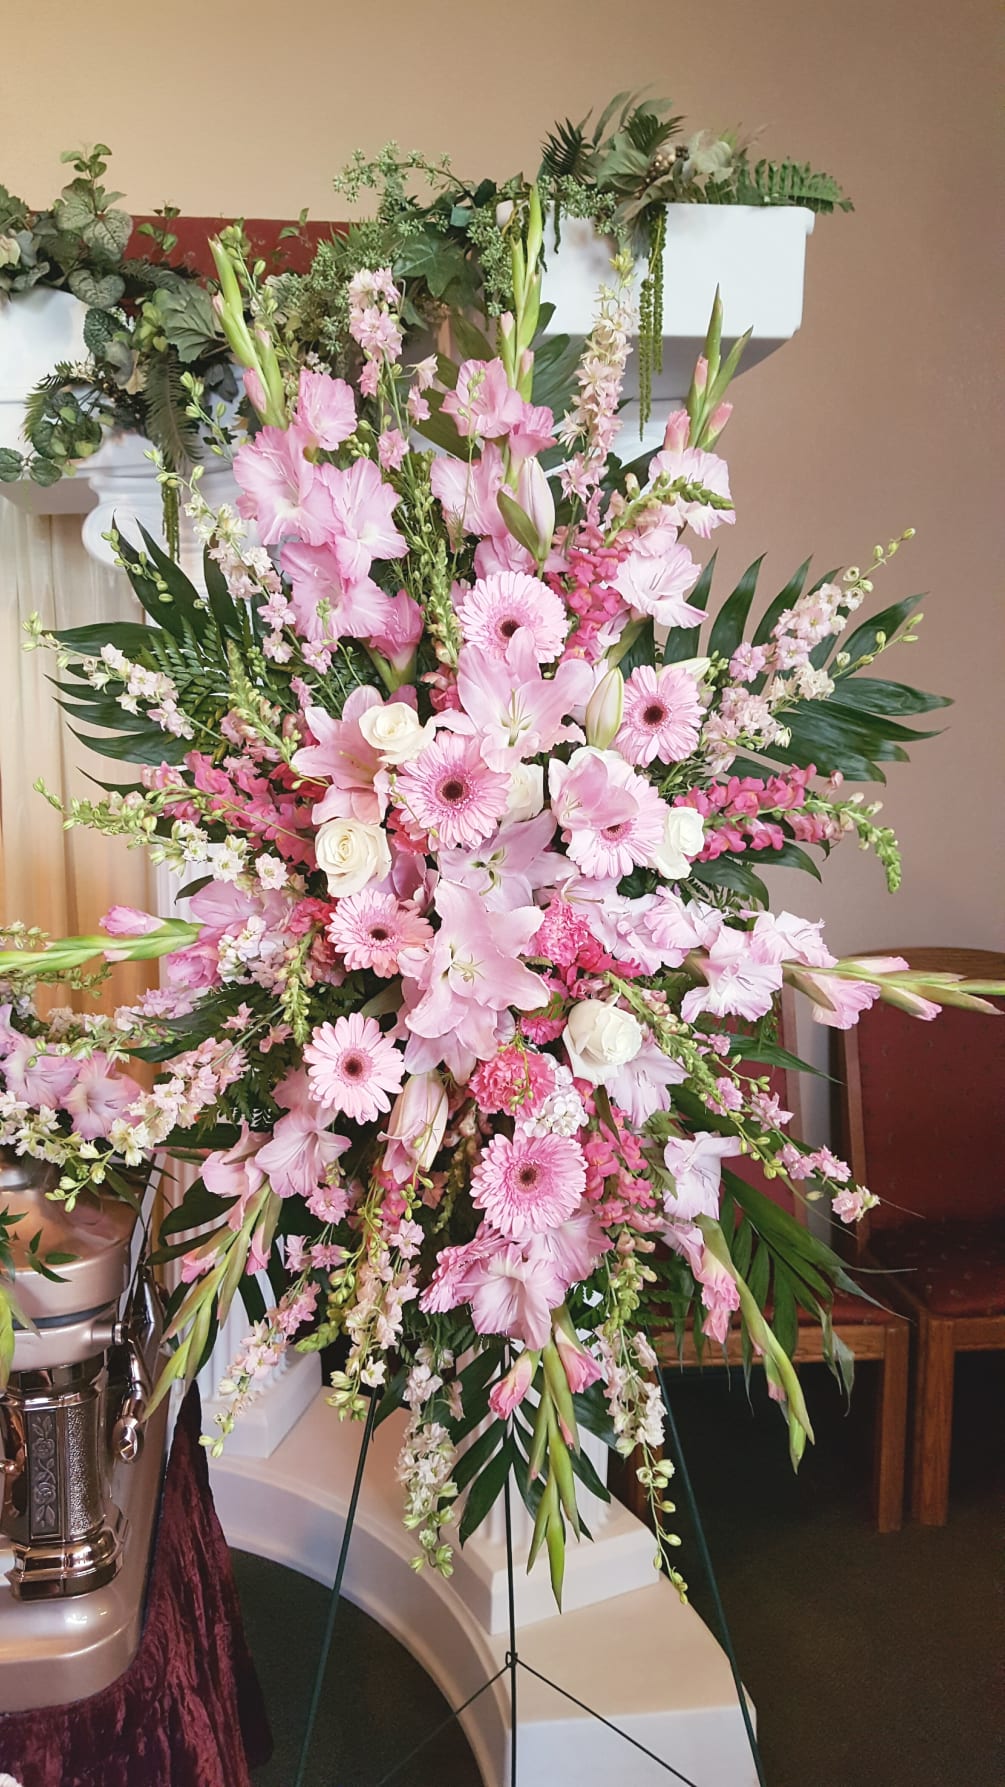 Send your love and respect with this array of pink blooms. Funeral/Celebration